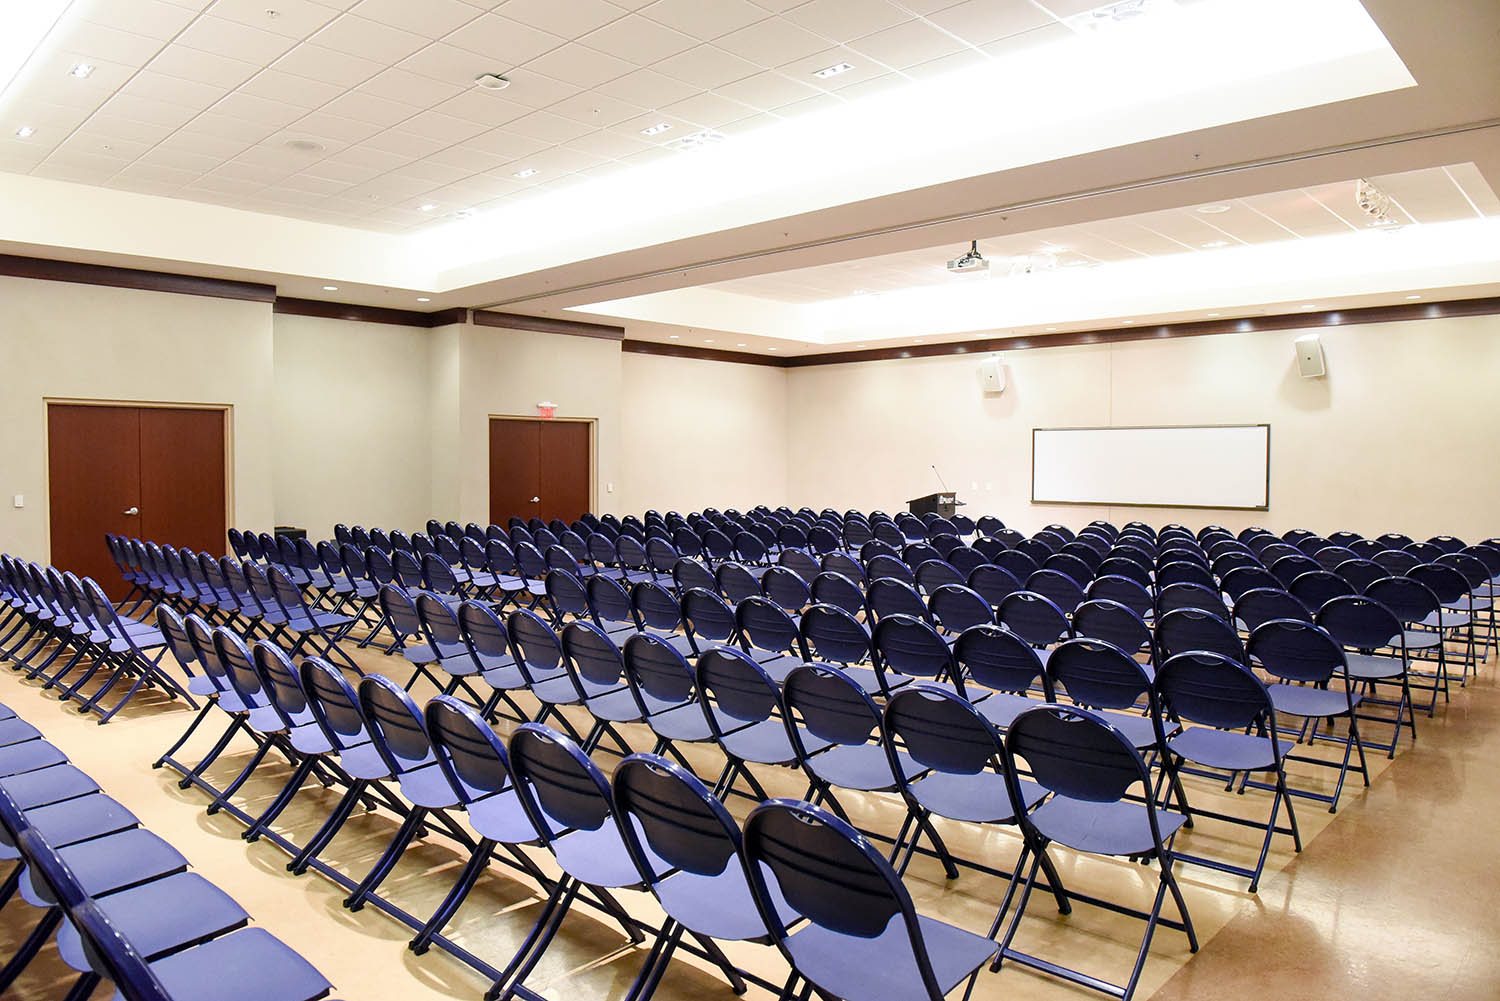 Beaman Conference Room with rows of empty chairs